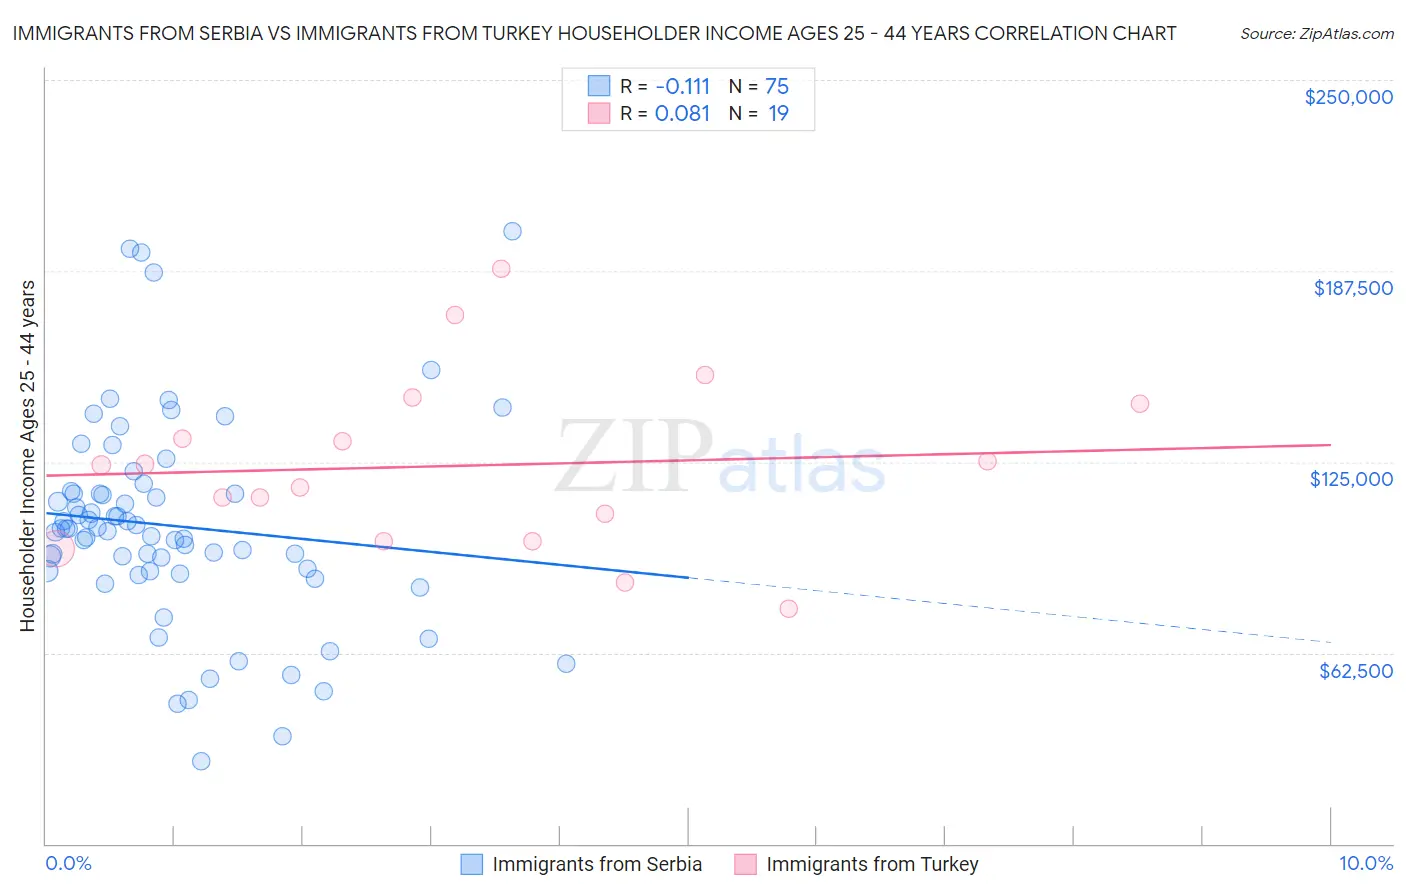 Immigrants from Serbia vs Immigrants from Turkey Householder Income Ages 25 - 44 years